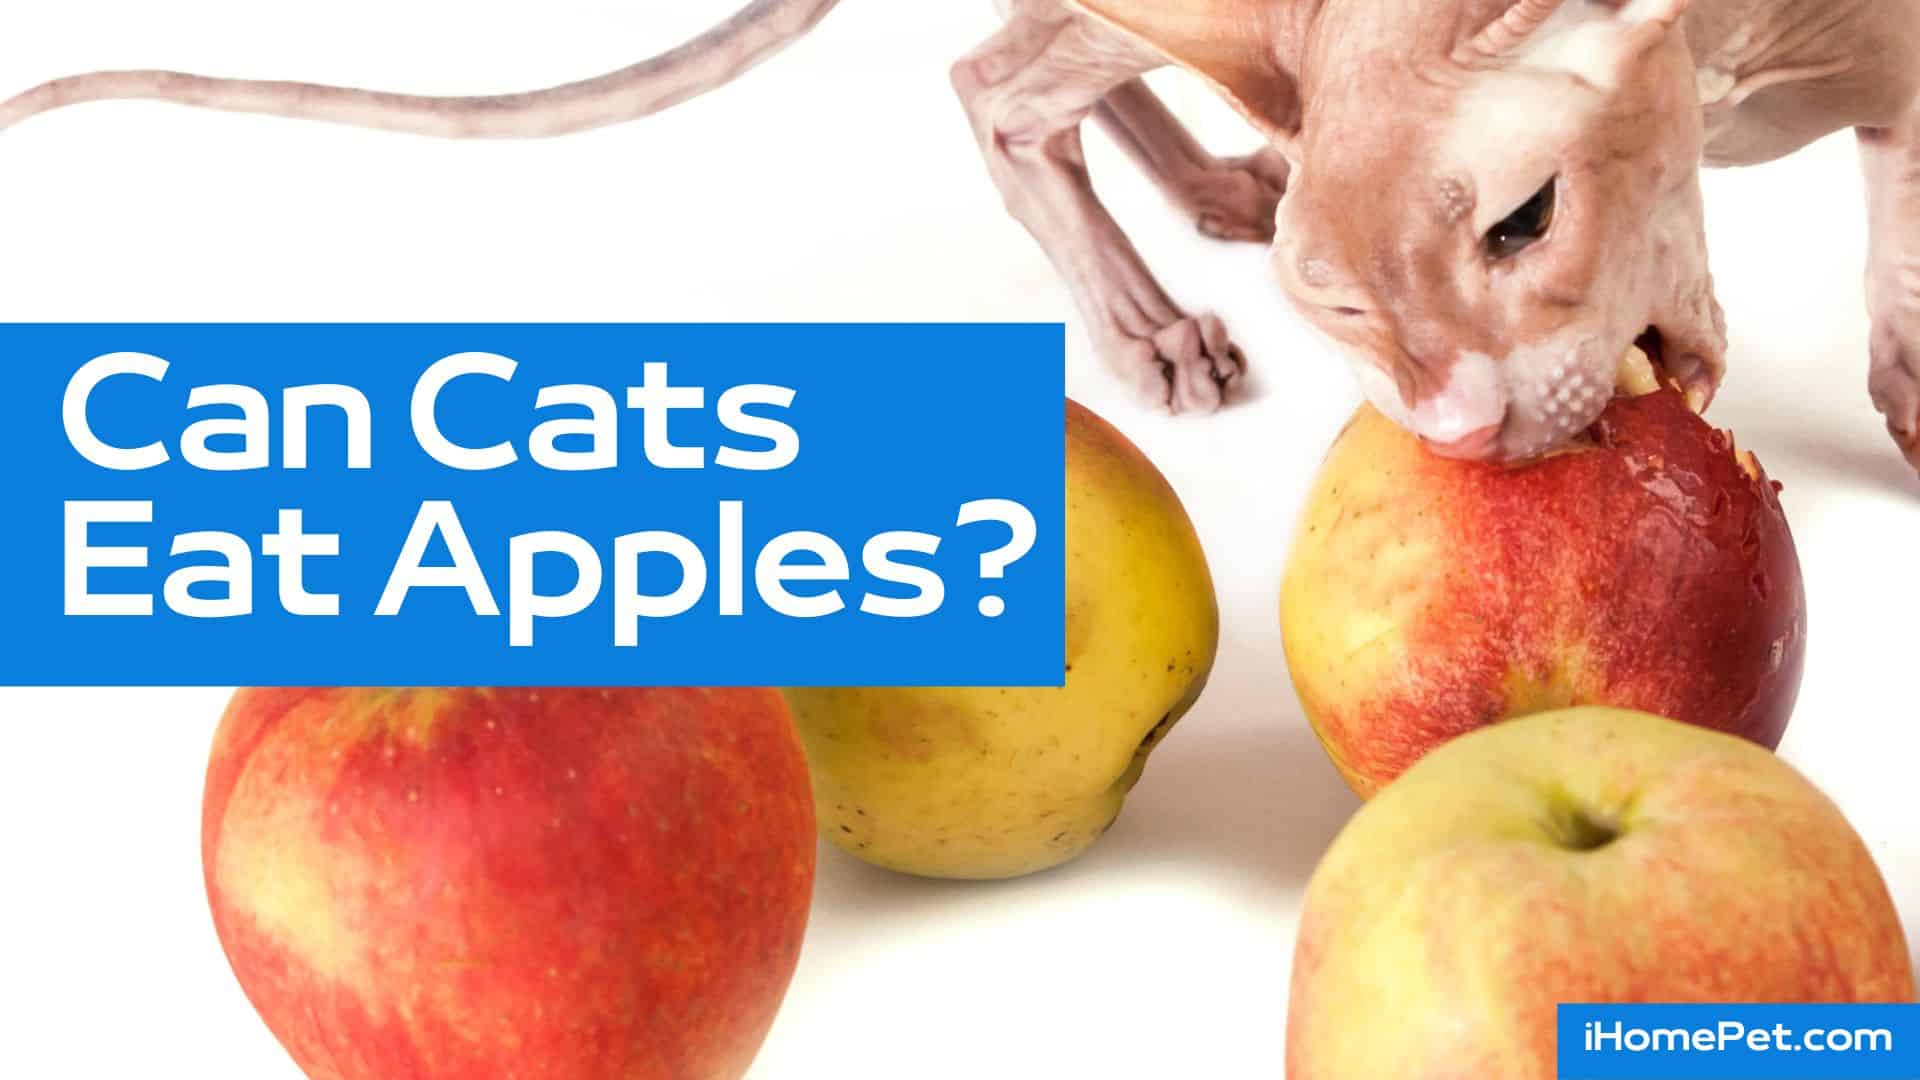 Be careful feeding your cat apple or other popular fruits